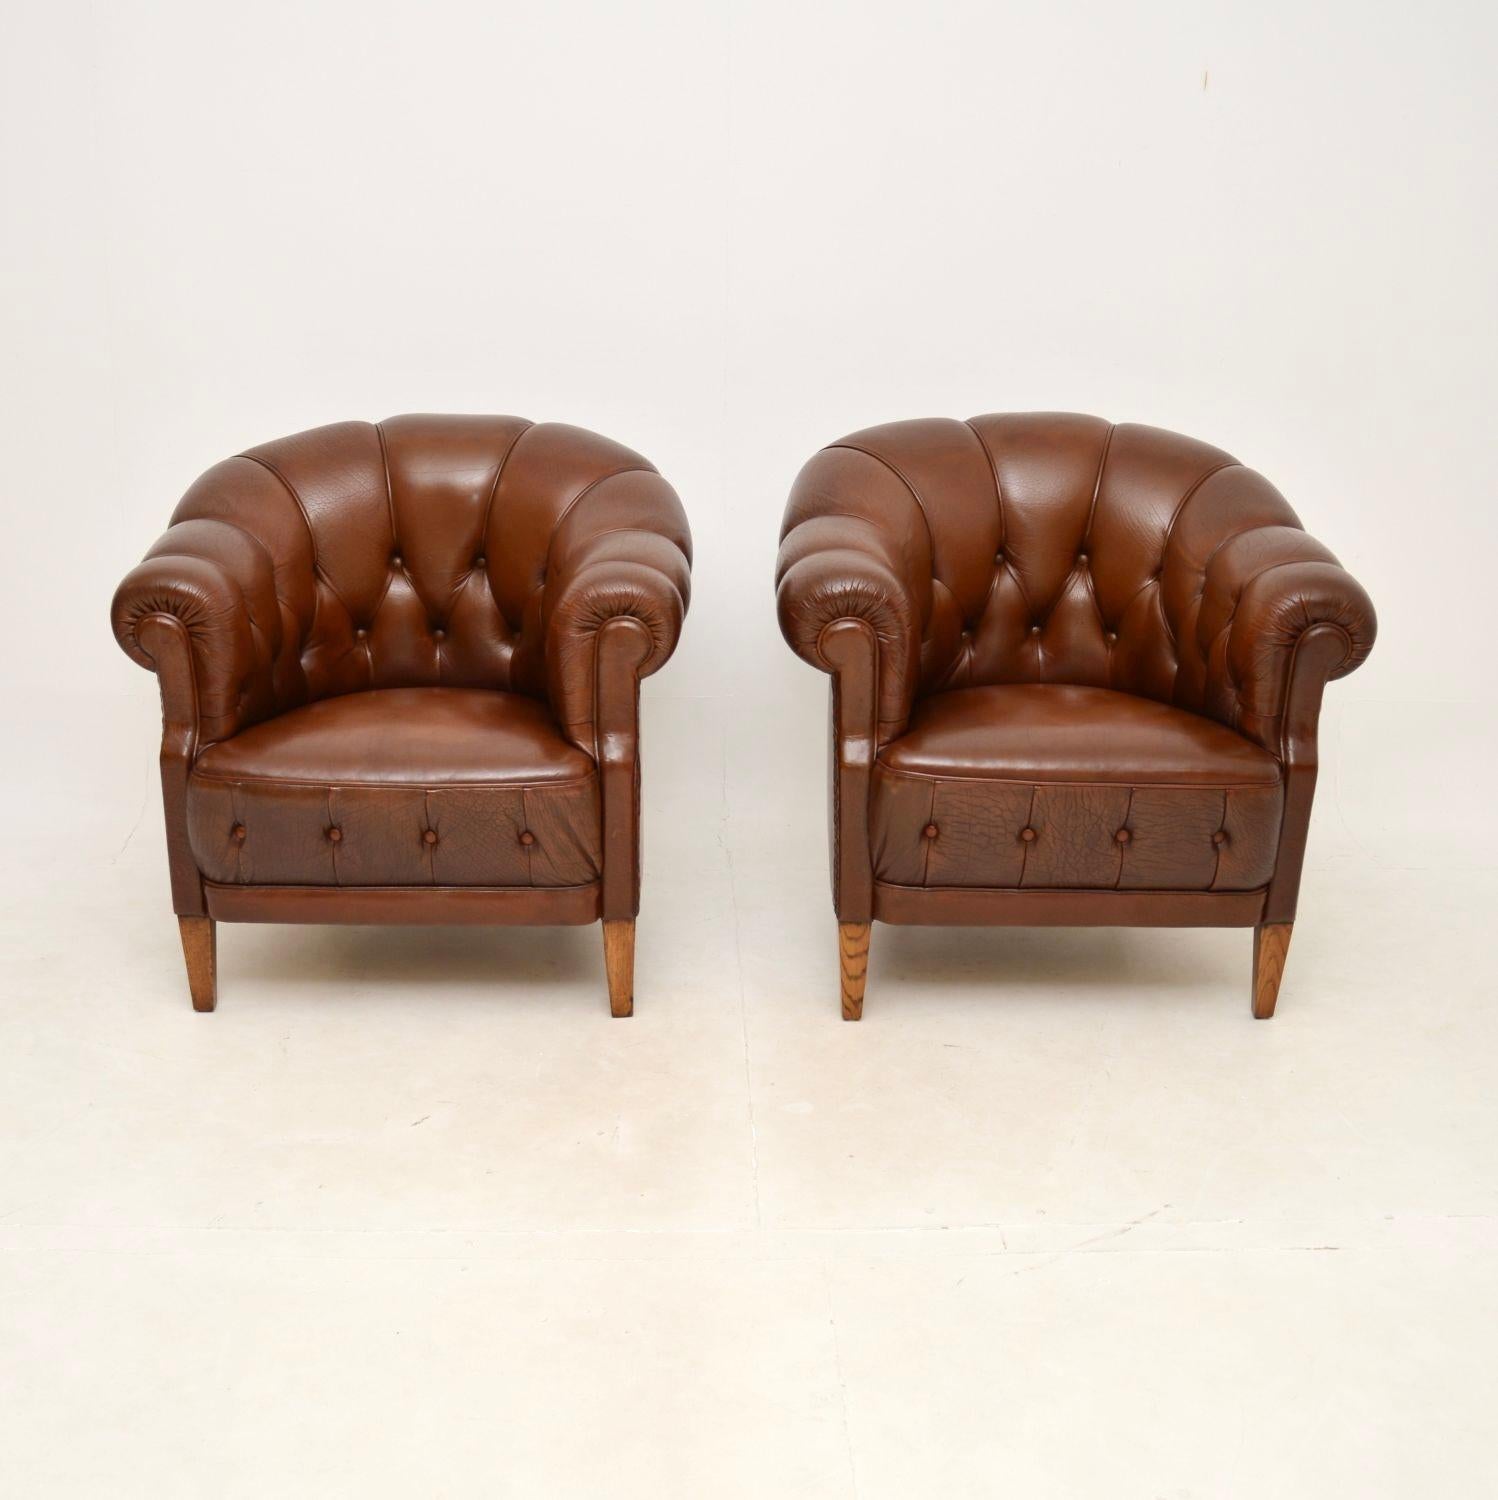 A fantastic pair of antique Swedish leather club armchairs. They were recently imported from Sweden, they date from around the 1950’s.

The quality is outstanding, they are extremely well made and comfortable. The leather is beautiful and thick,